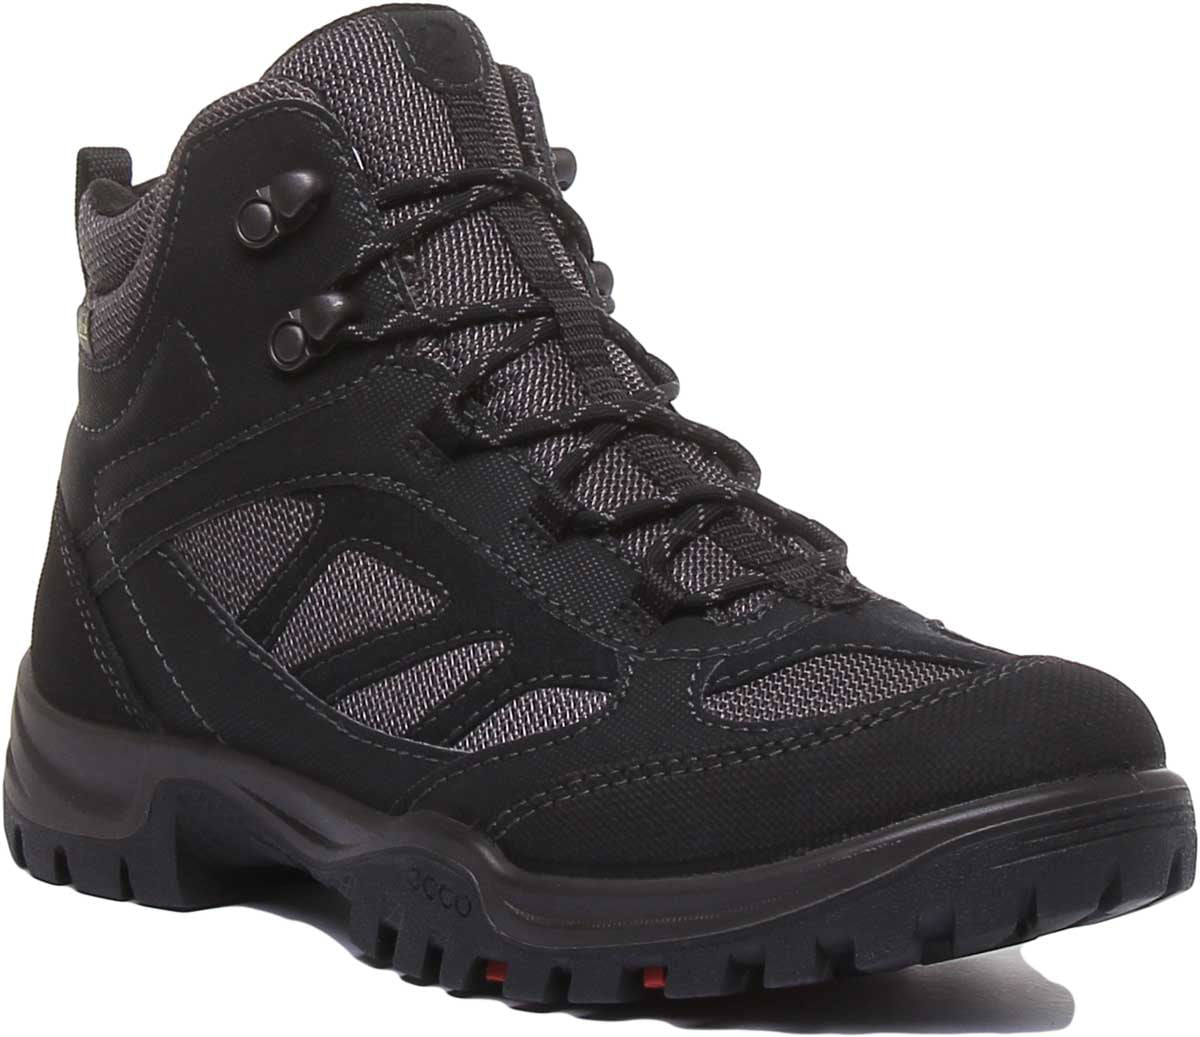 Onenigheid Omleiding stroomkring Ecco Xpedition 3 Women's Lace Up Gore Tex Hiking Boot In Black Size 10/10.5  - Walmart.com